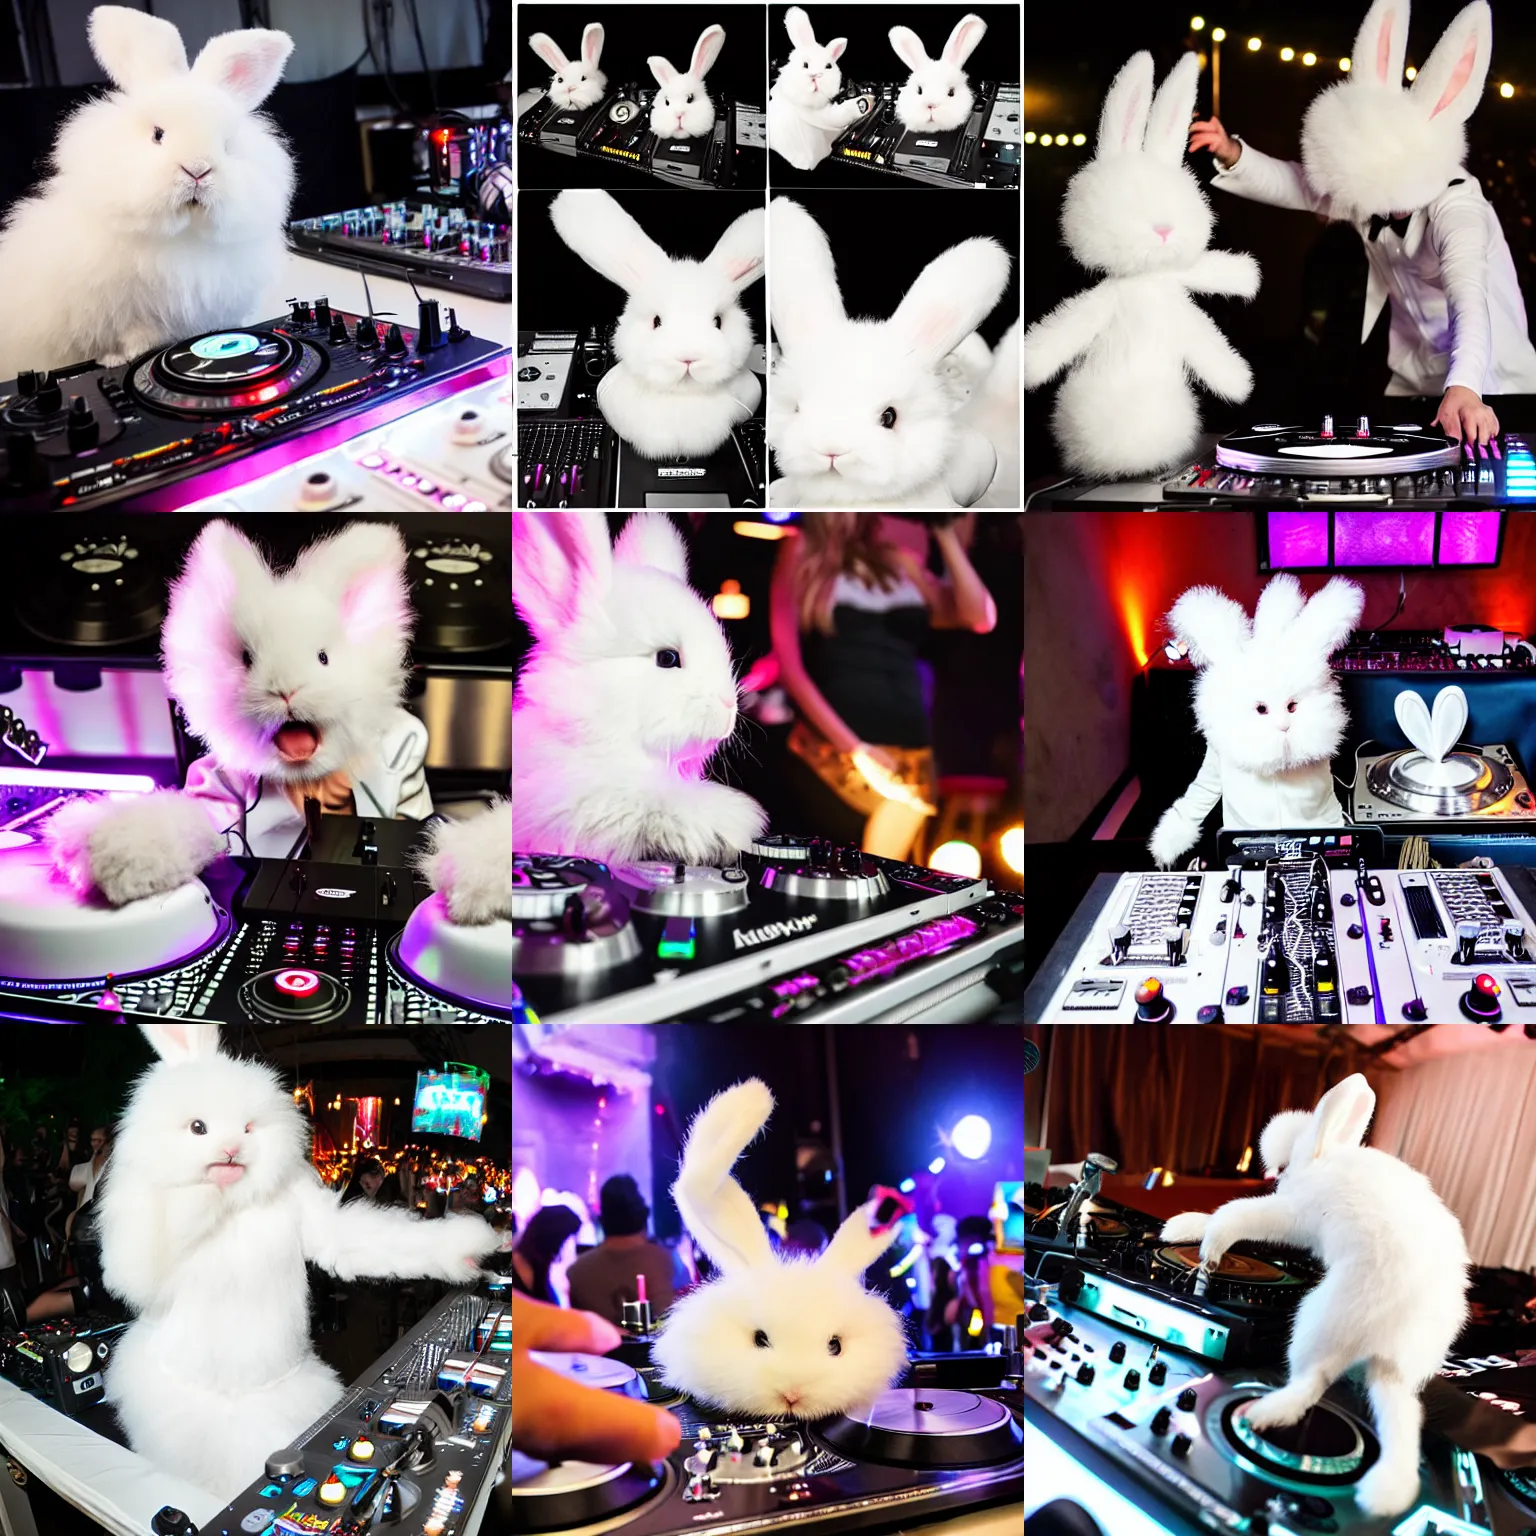 Prompt: super cute fluffy white bunny rabbit on a motorcycle DJing with DJ turntables, photoreal